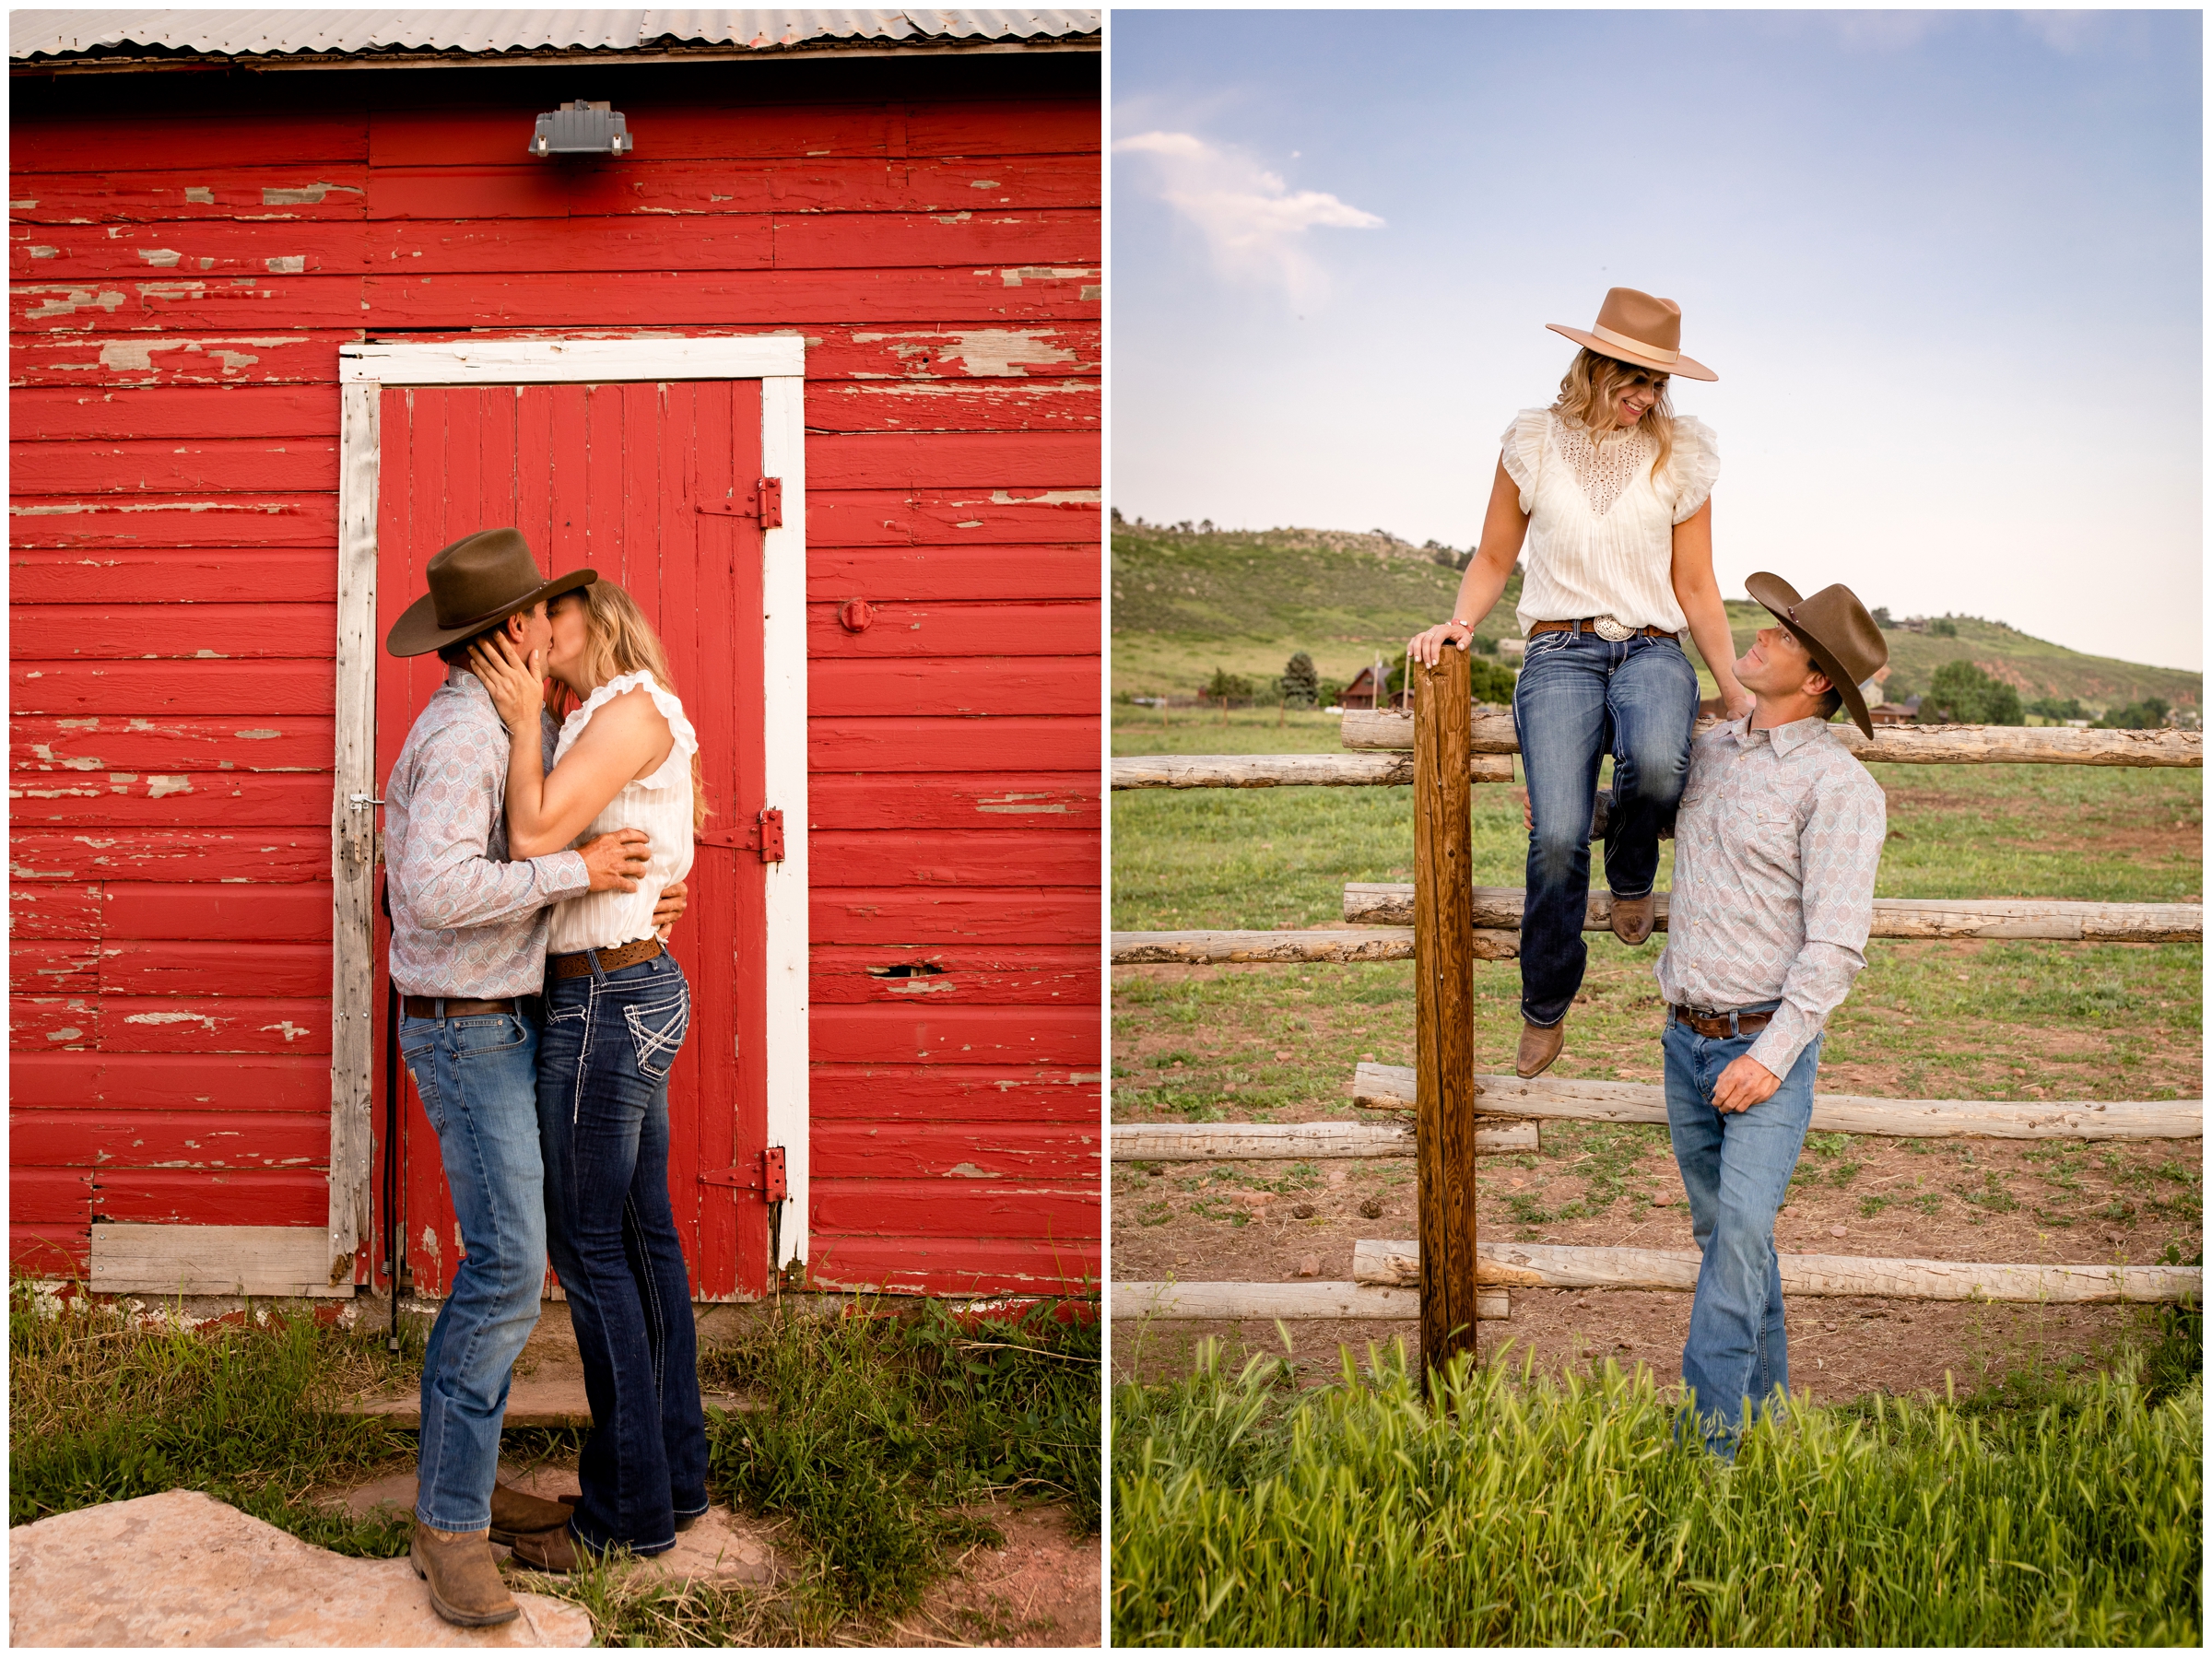 country couple kissing in front of red barn during rustic engagement portraits by Loveland photographer plum pretty photography 